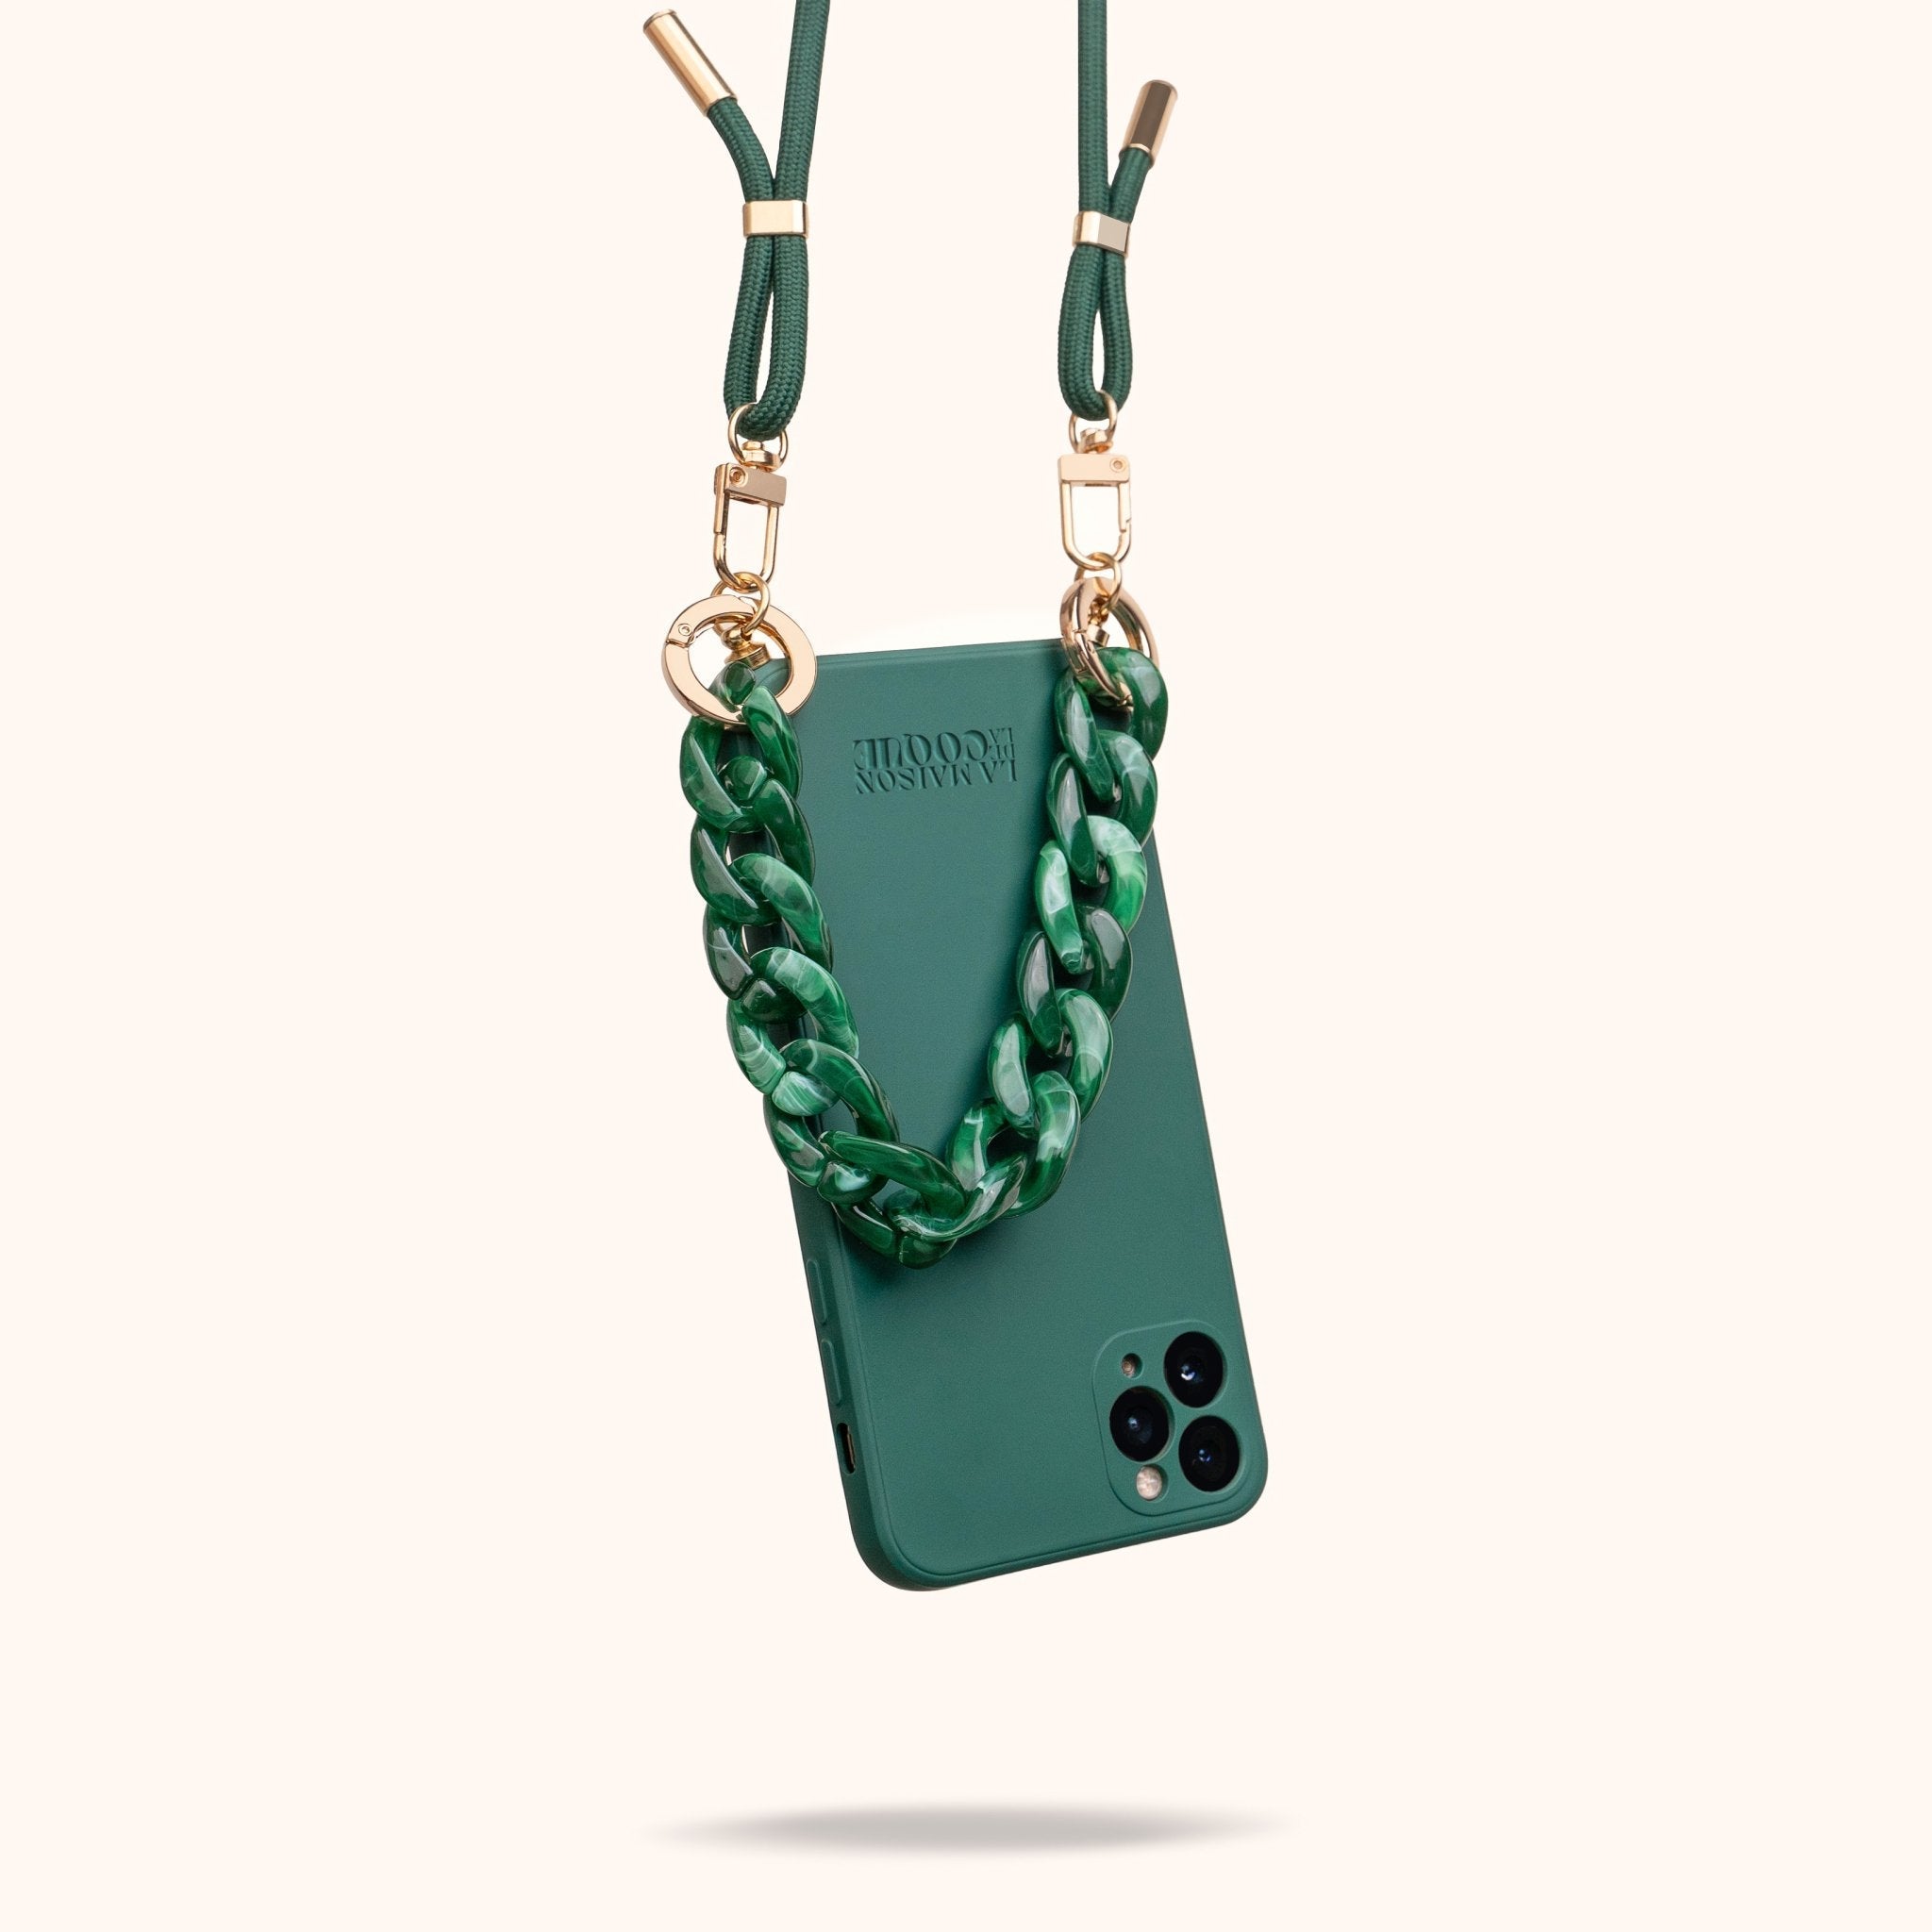 iPhone Strap Case "Amber Green" - House Of Case